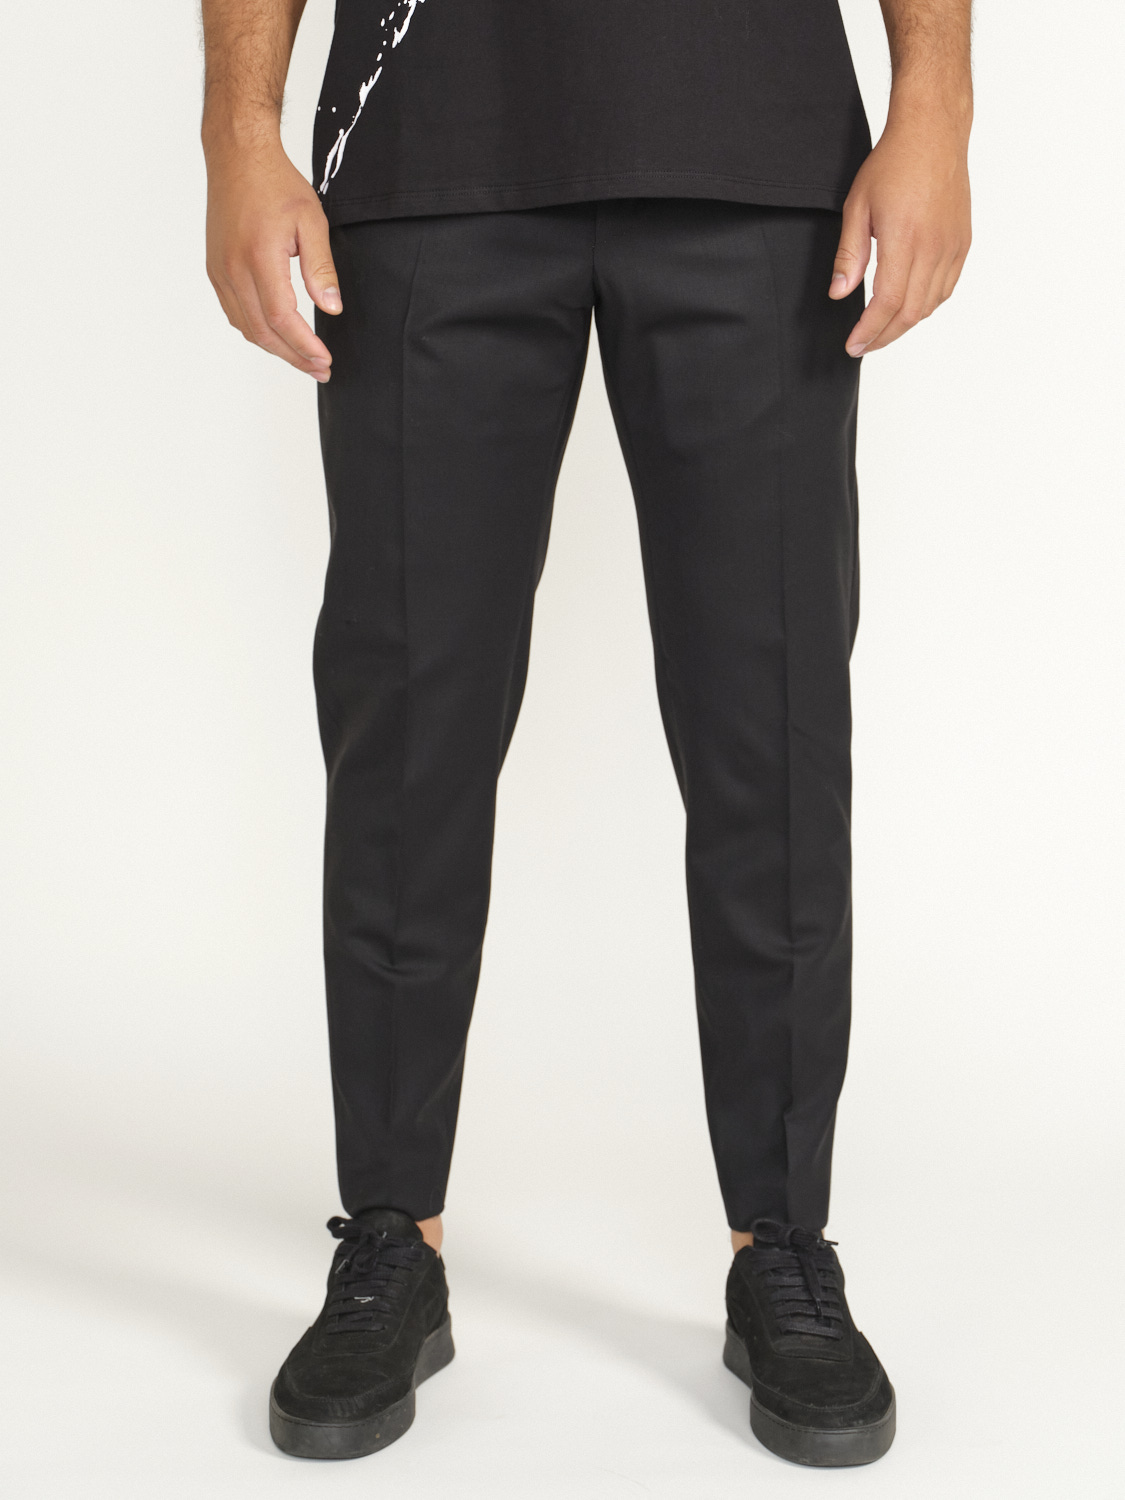 PT Torino Rebel - Suit trousers with crease  black 46